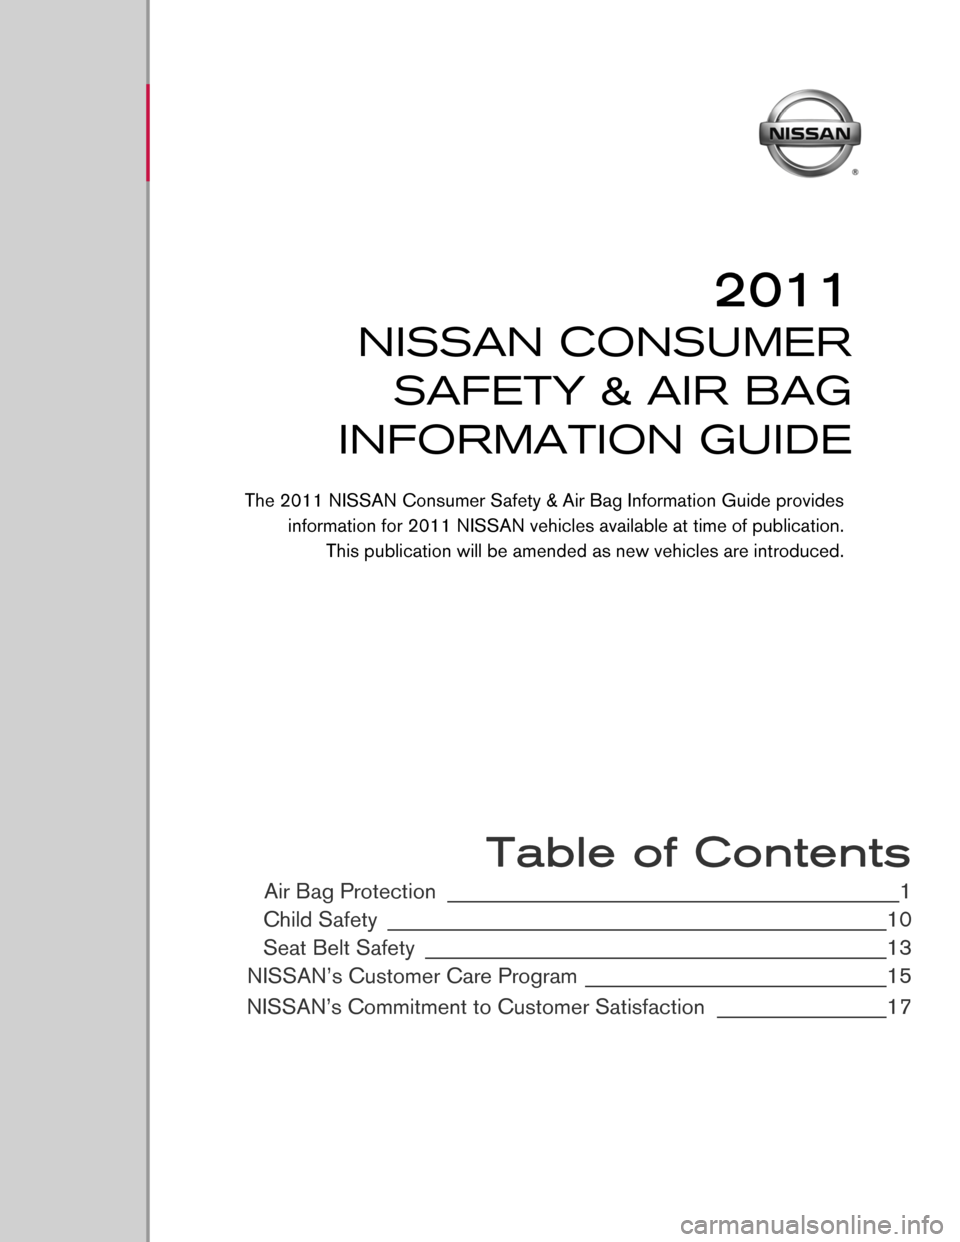 NISSAN SENTRA 2011 B16 / 6.G Consumer Safety Air Bag Information Guide  
 
 
 
 
 
 
 
 
 
 
 
 
 
 
 
 
 
 
 
 
 
 
 Table of Contents
Air Bag Protection ________________________________________________1
Child Safety
 ____________________________________________________